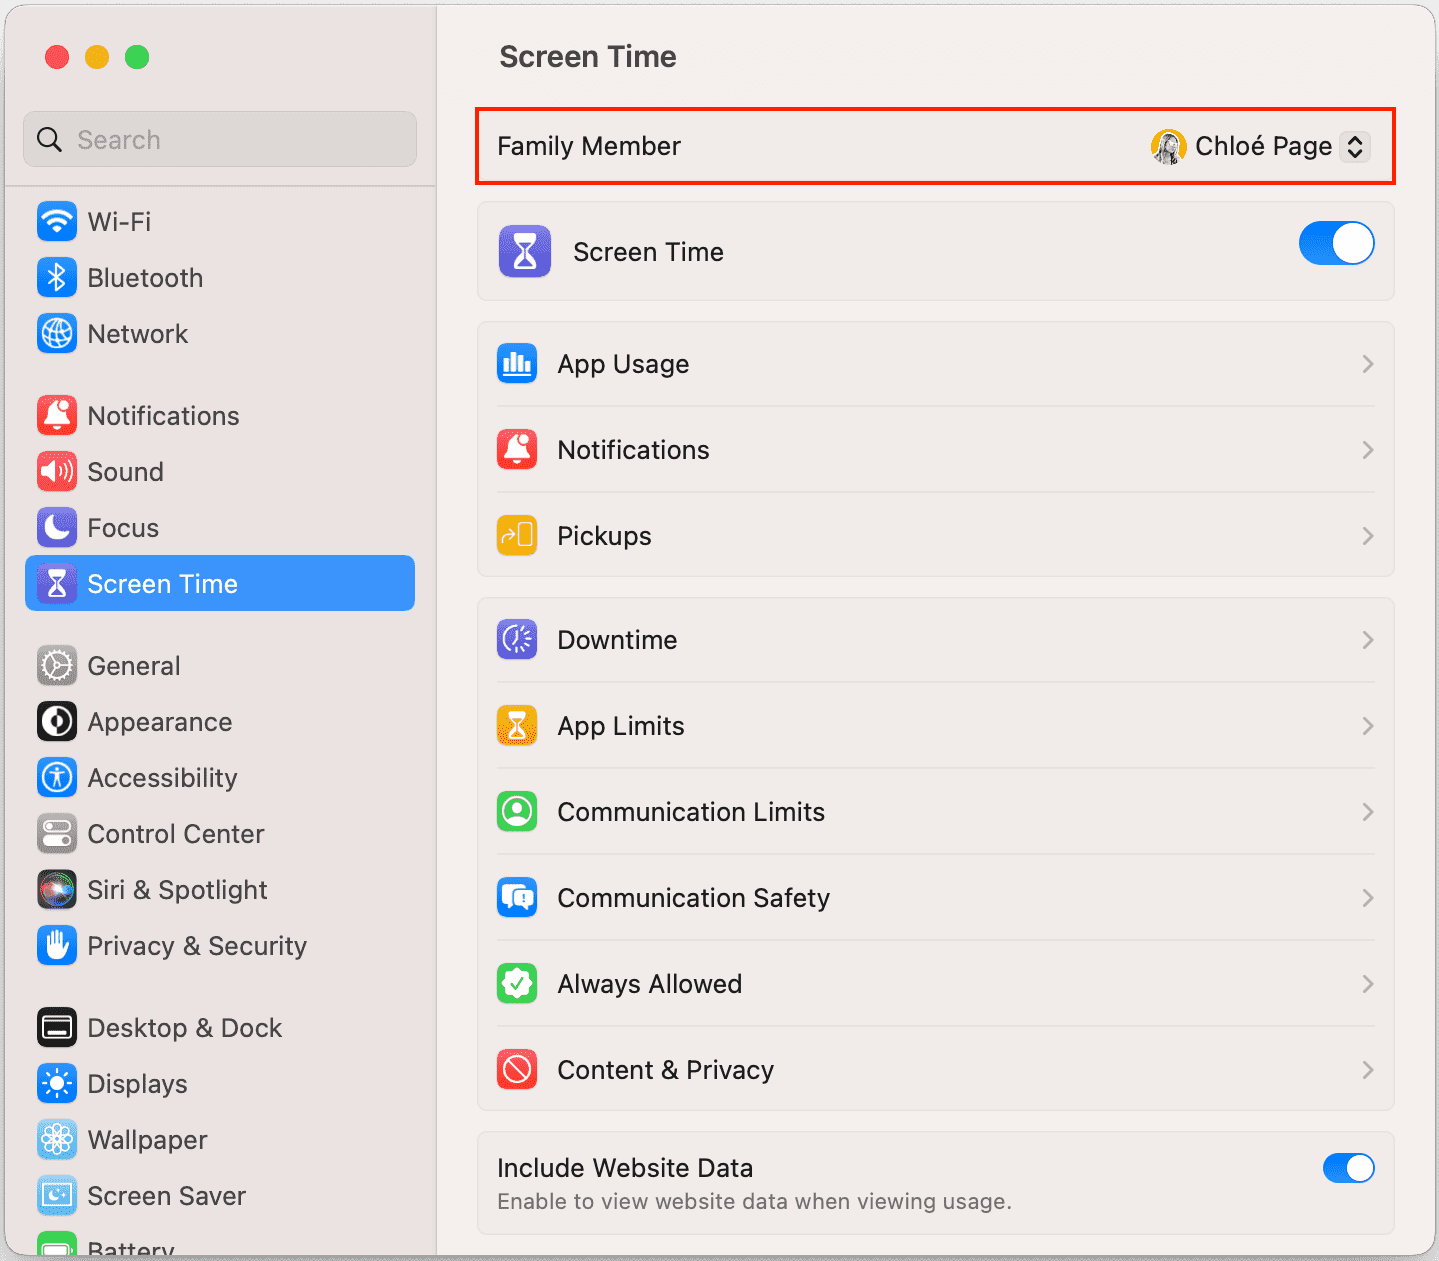 Select family member in Screen Time settings on Family Organizer's Mac